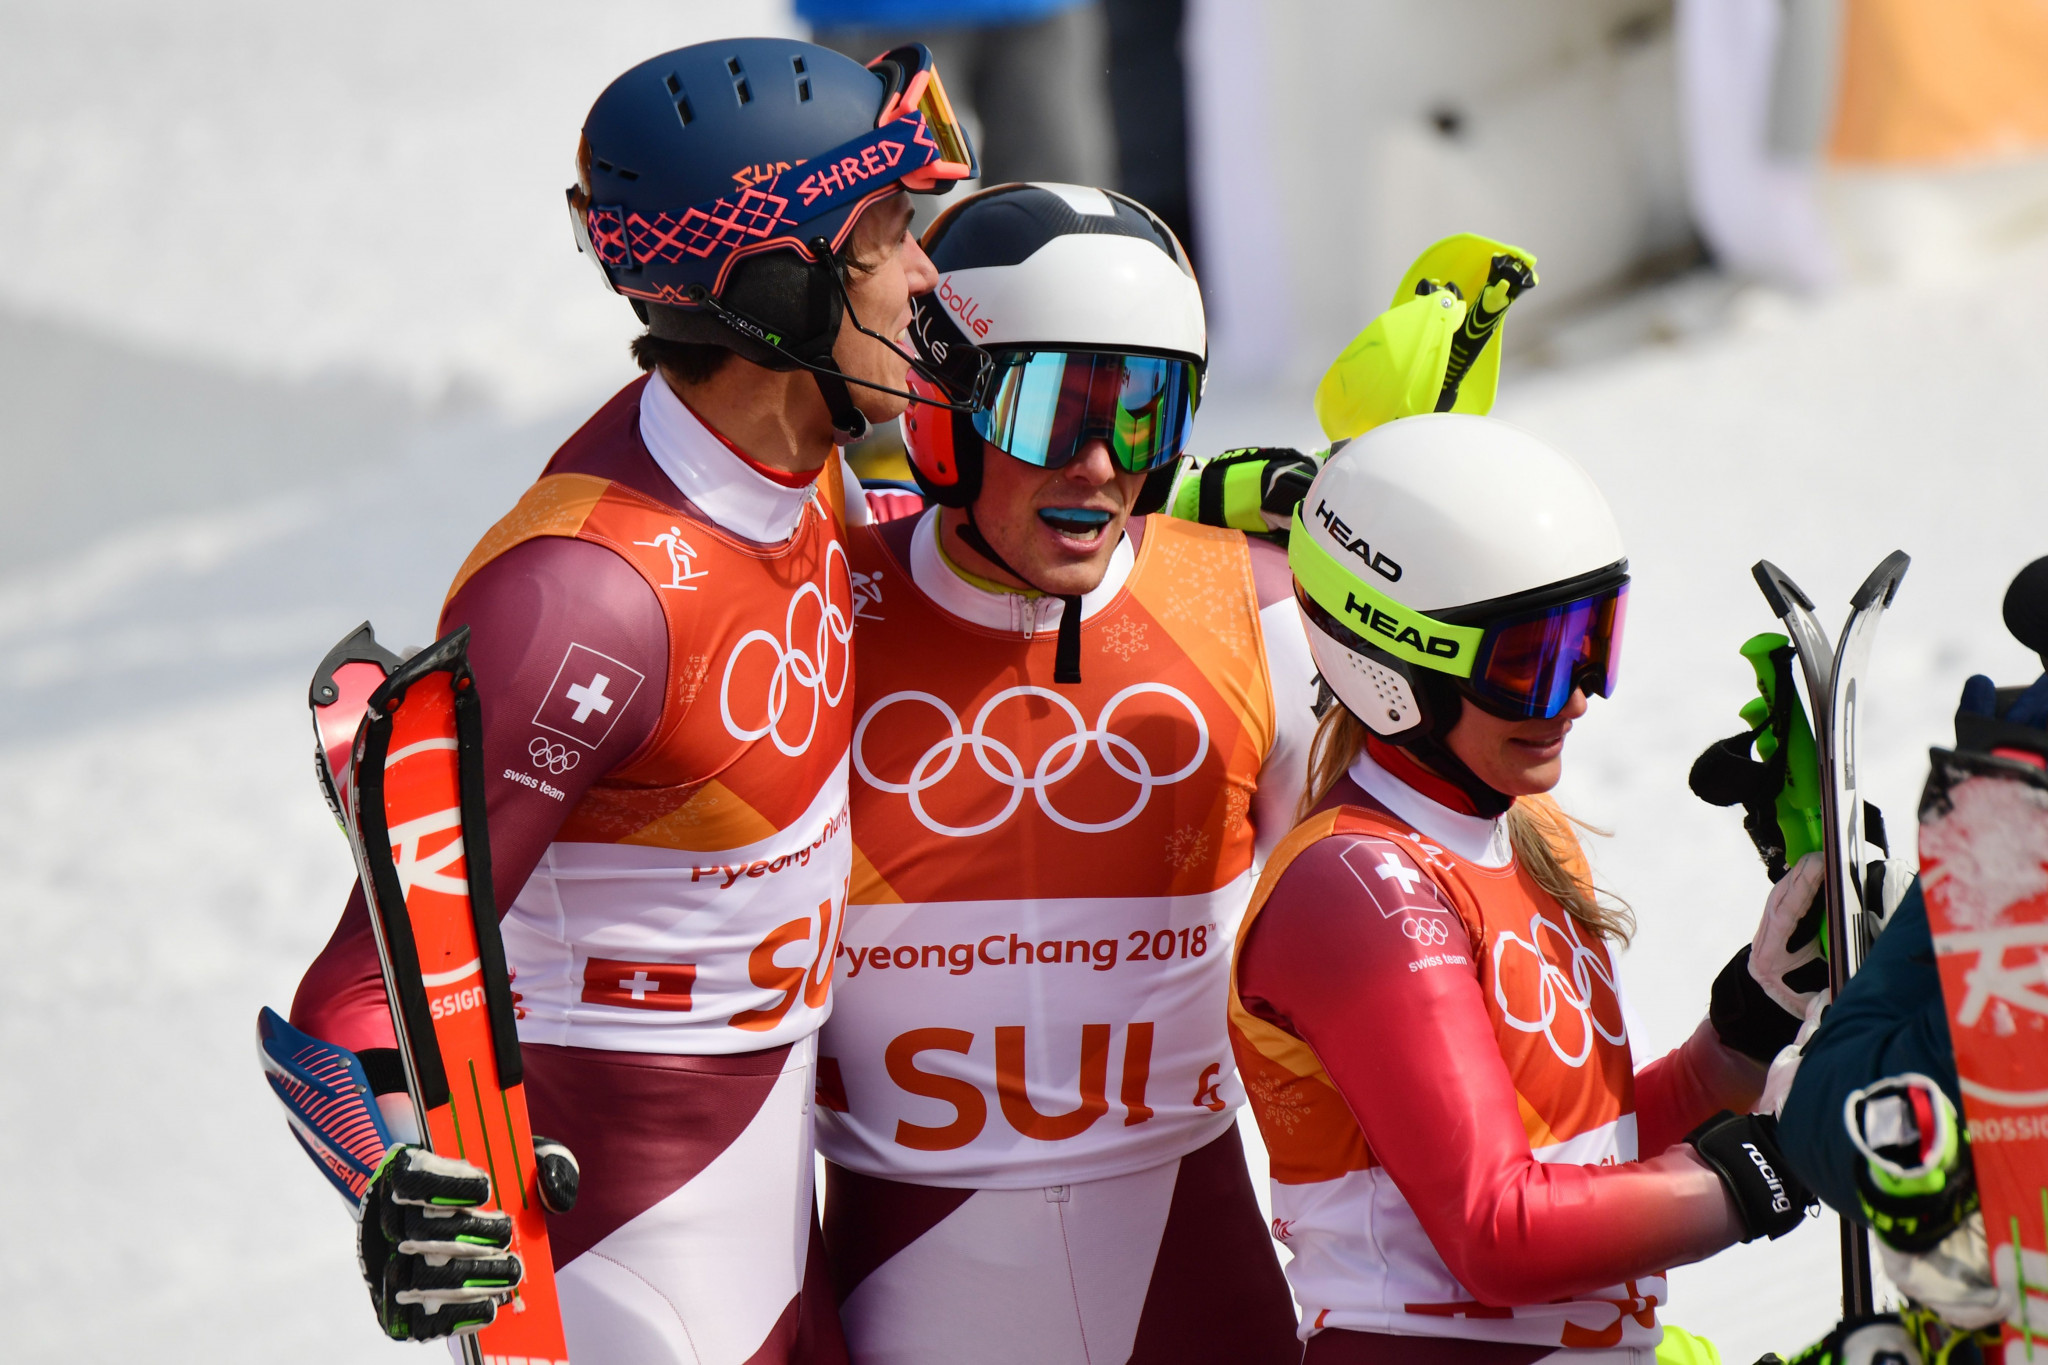 Switzerland win first-ever Olympic Alpine team event title at Pyeongchang 2018